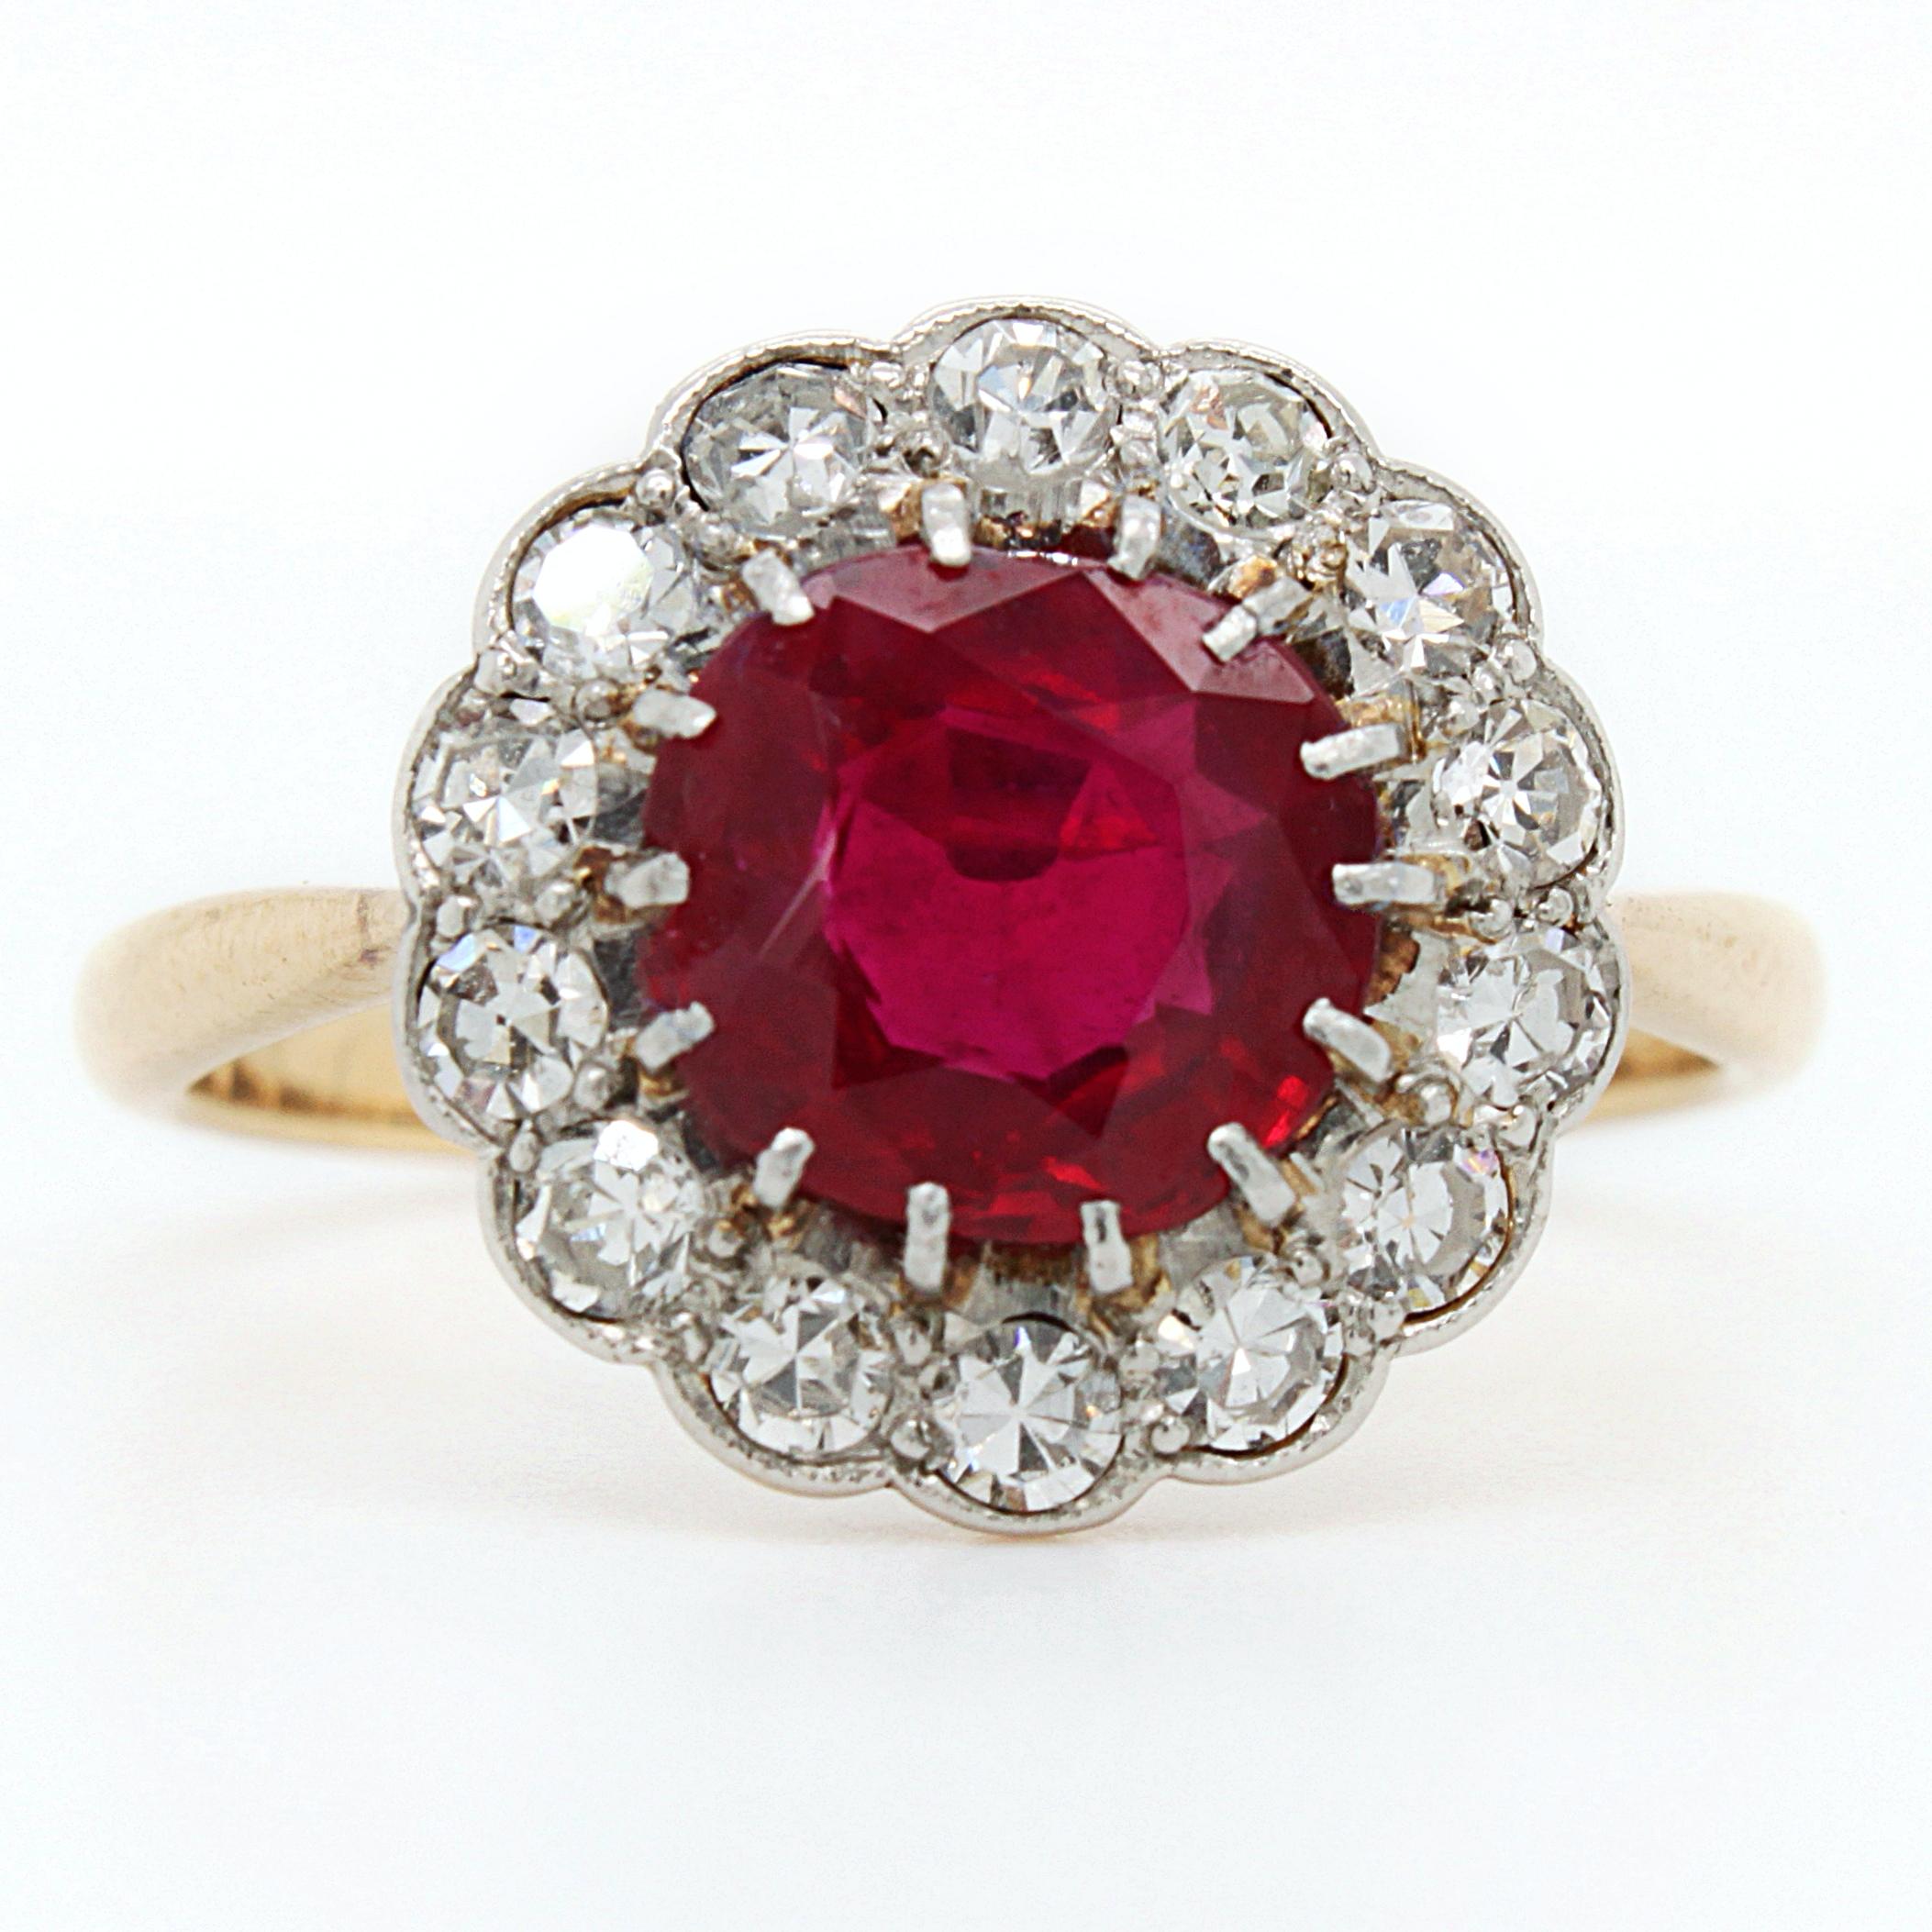 Pigeon Blood Ruby 'No Heat, Burma' and Diamond Cluster Ring, ca. 1900 For Sale 3